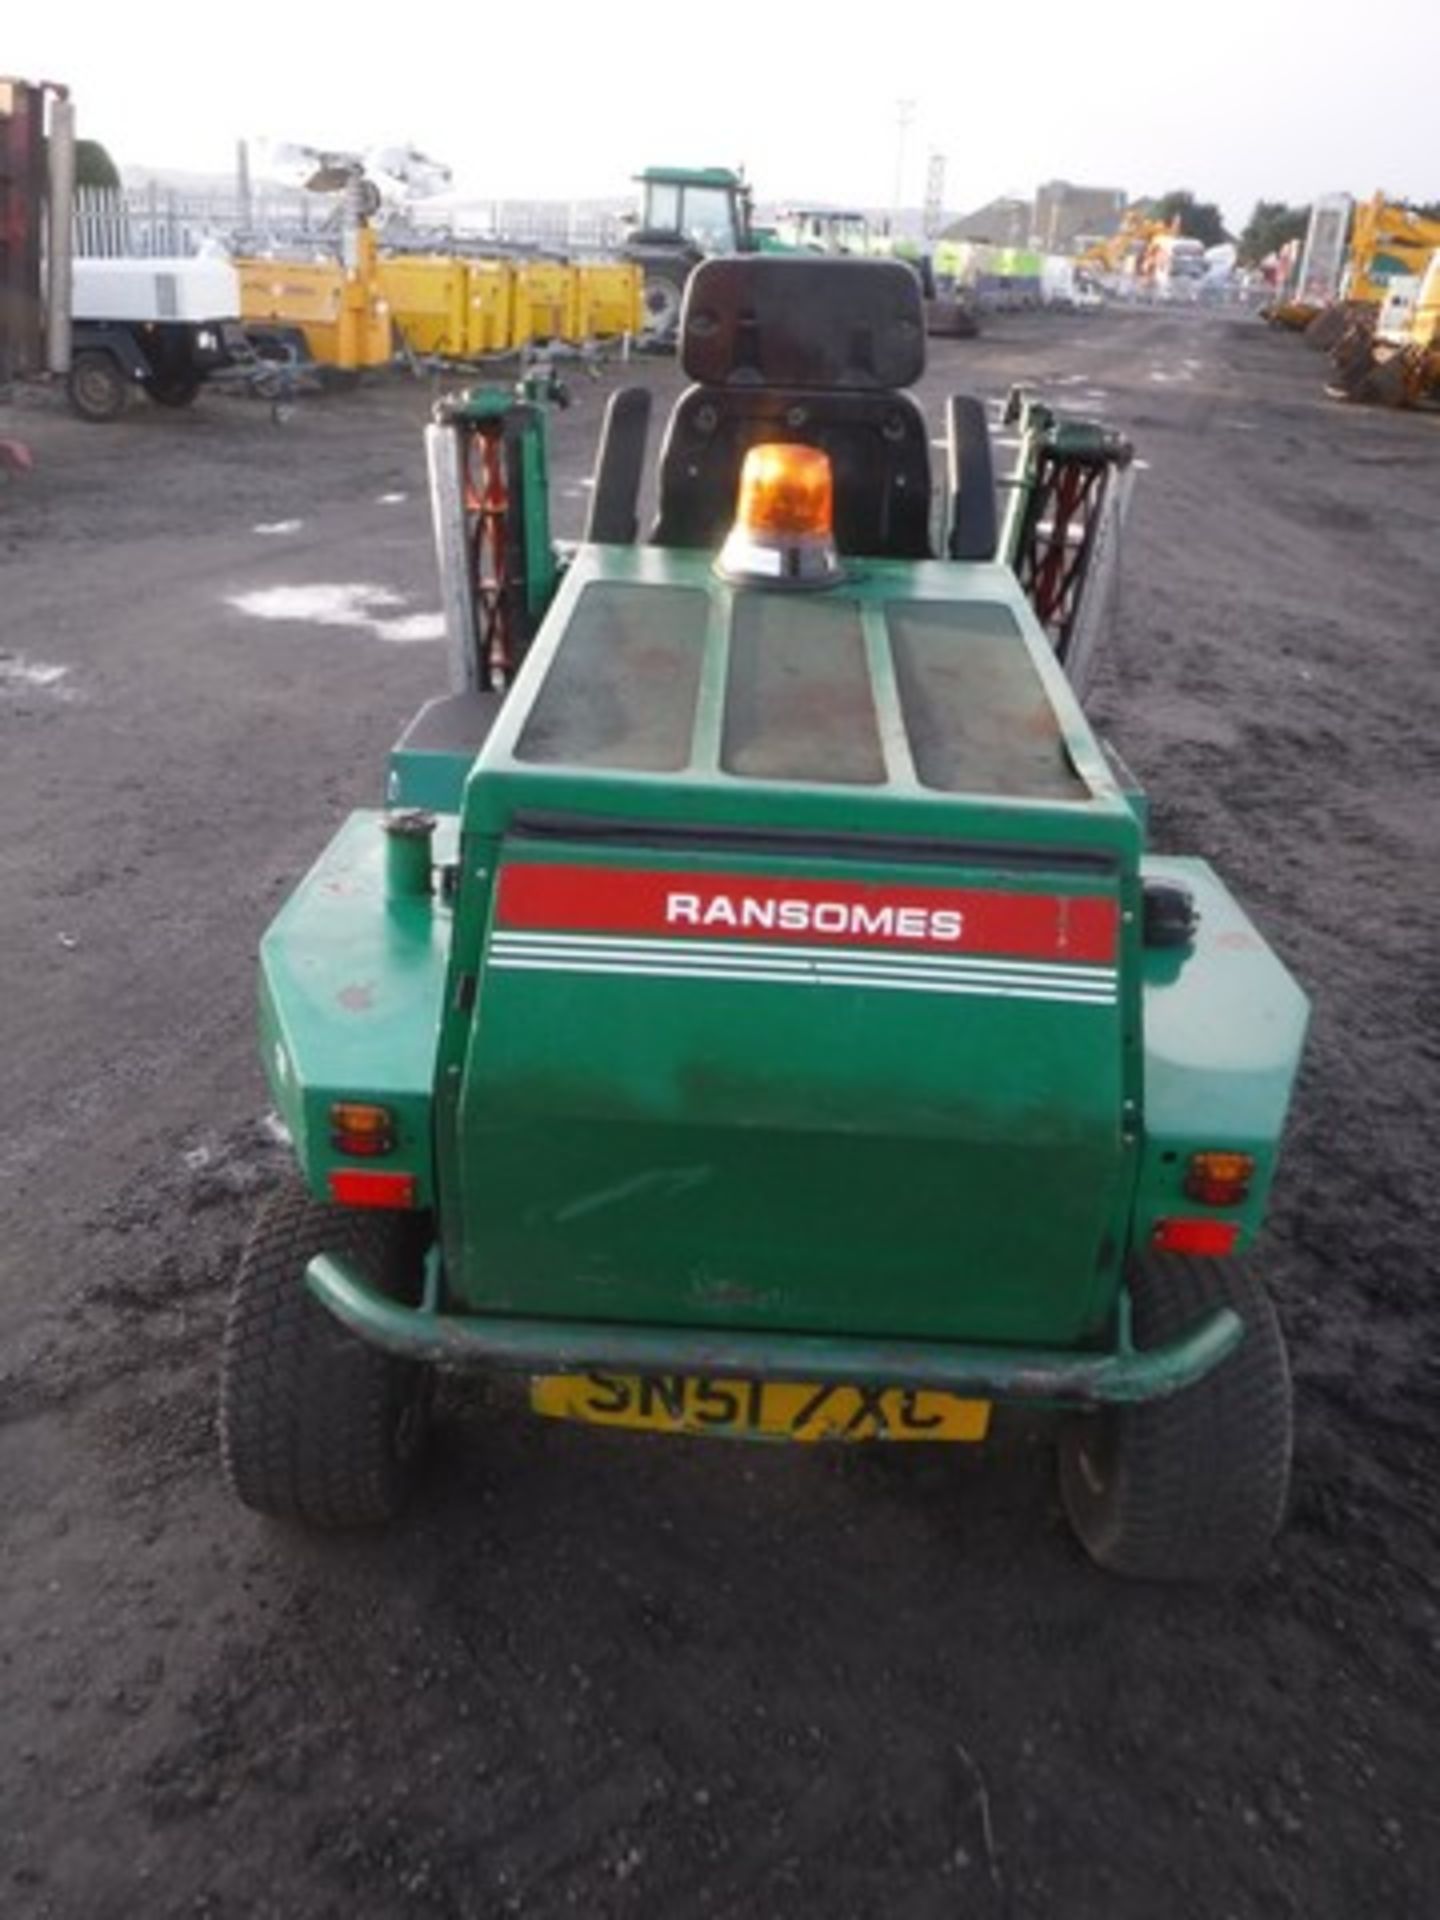 RANSOMES highway mower 3075 hrs.S/N WJ000567. Reg No SN51 ZXC - Image 3 of 7